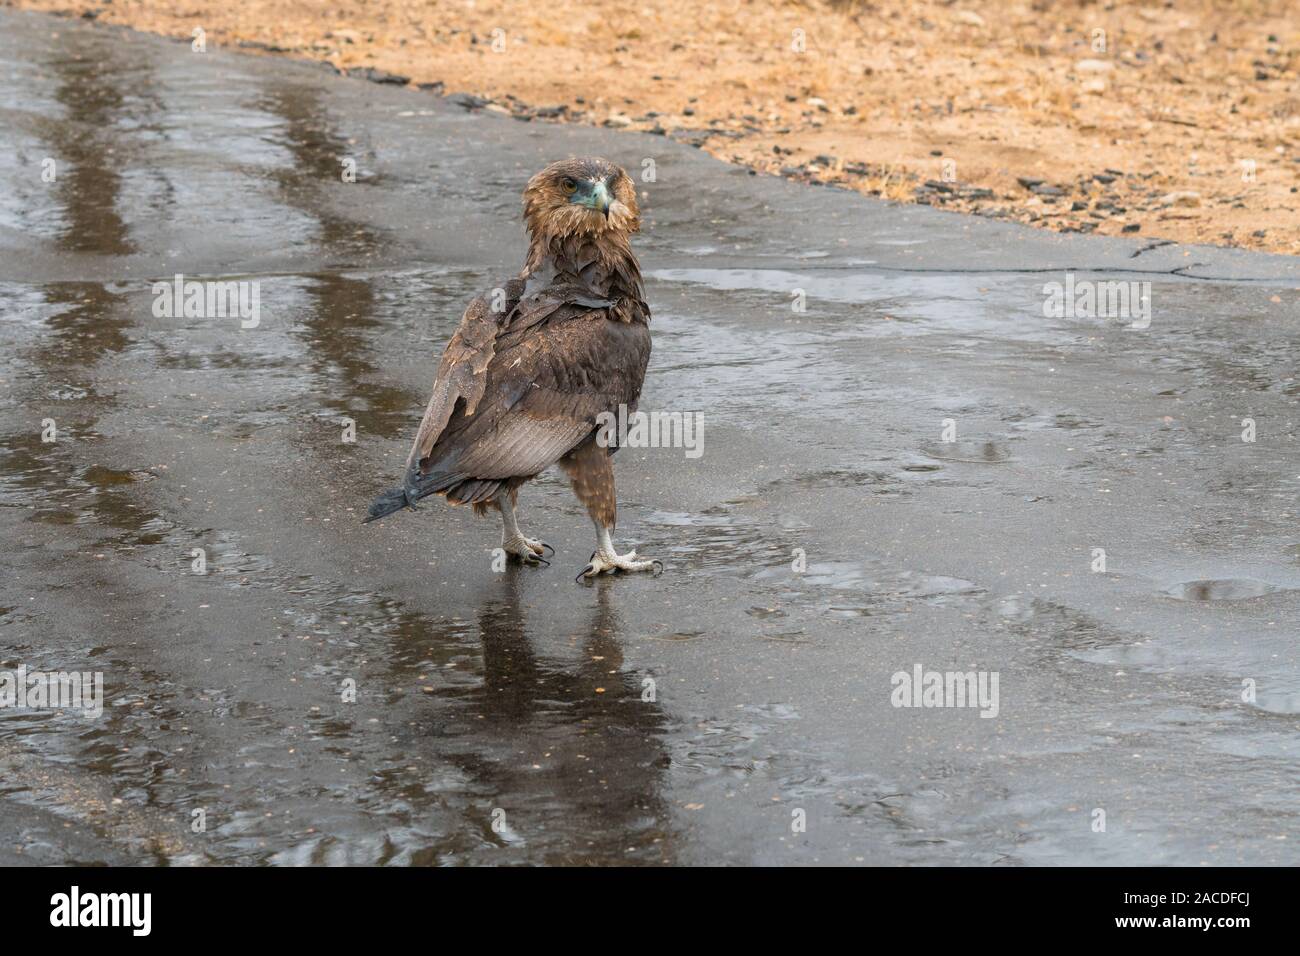 Immature Bateleur eagle (Terathopius ecaudatus) standing in the rain on a wet road in Kruger national park, South Africa looking around and alert Stock Photo